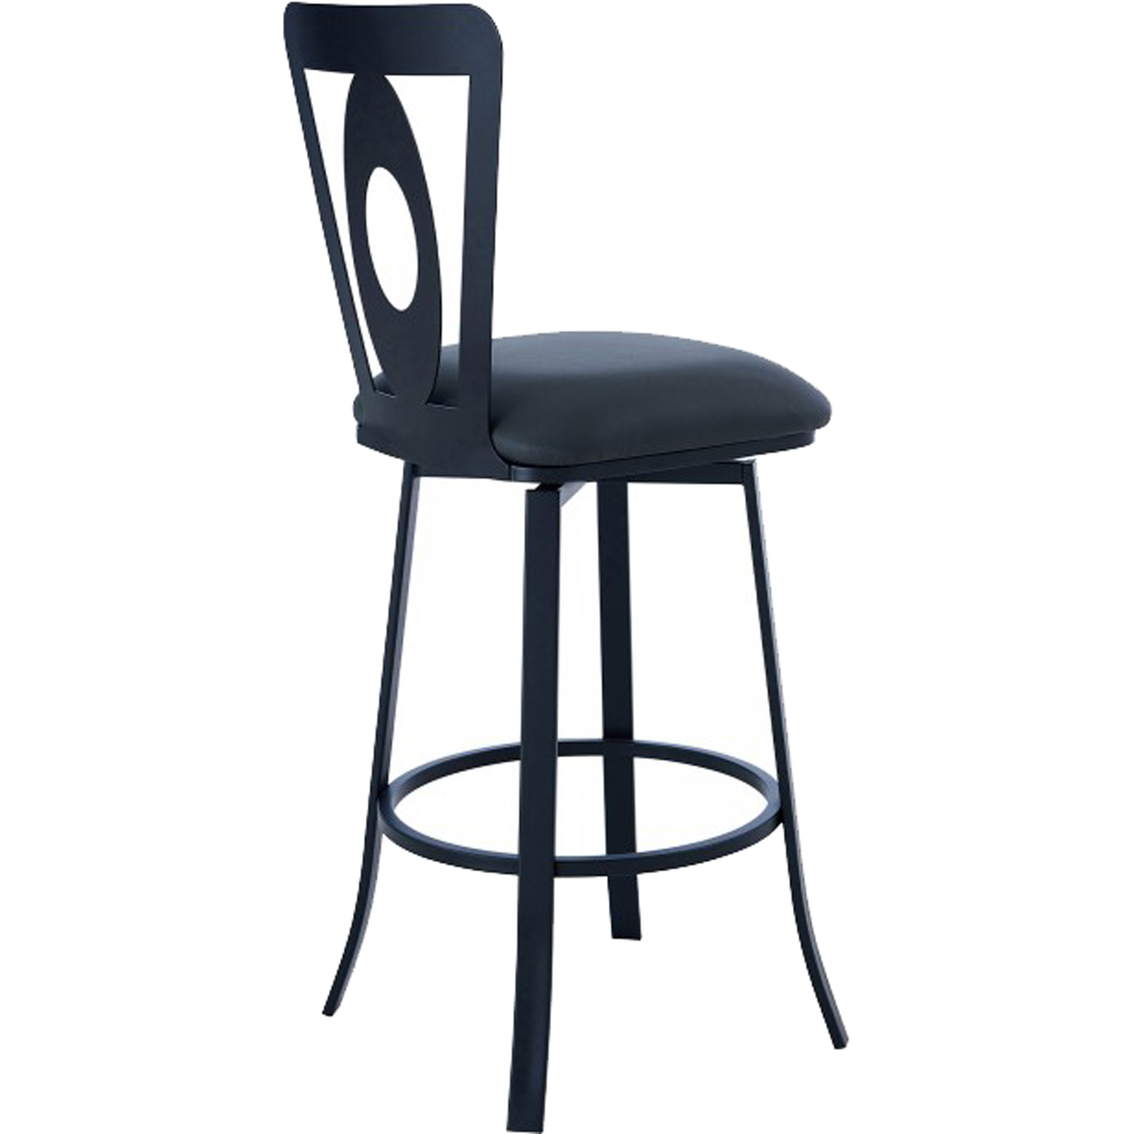 Armen Living Lola Barstool in Matte Black Finish and Grey Faux Leather - Image 3 of 7